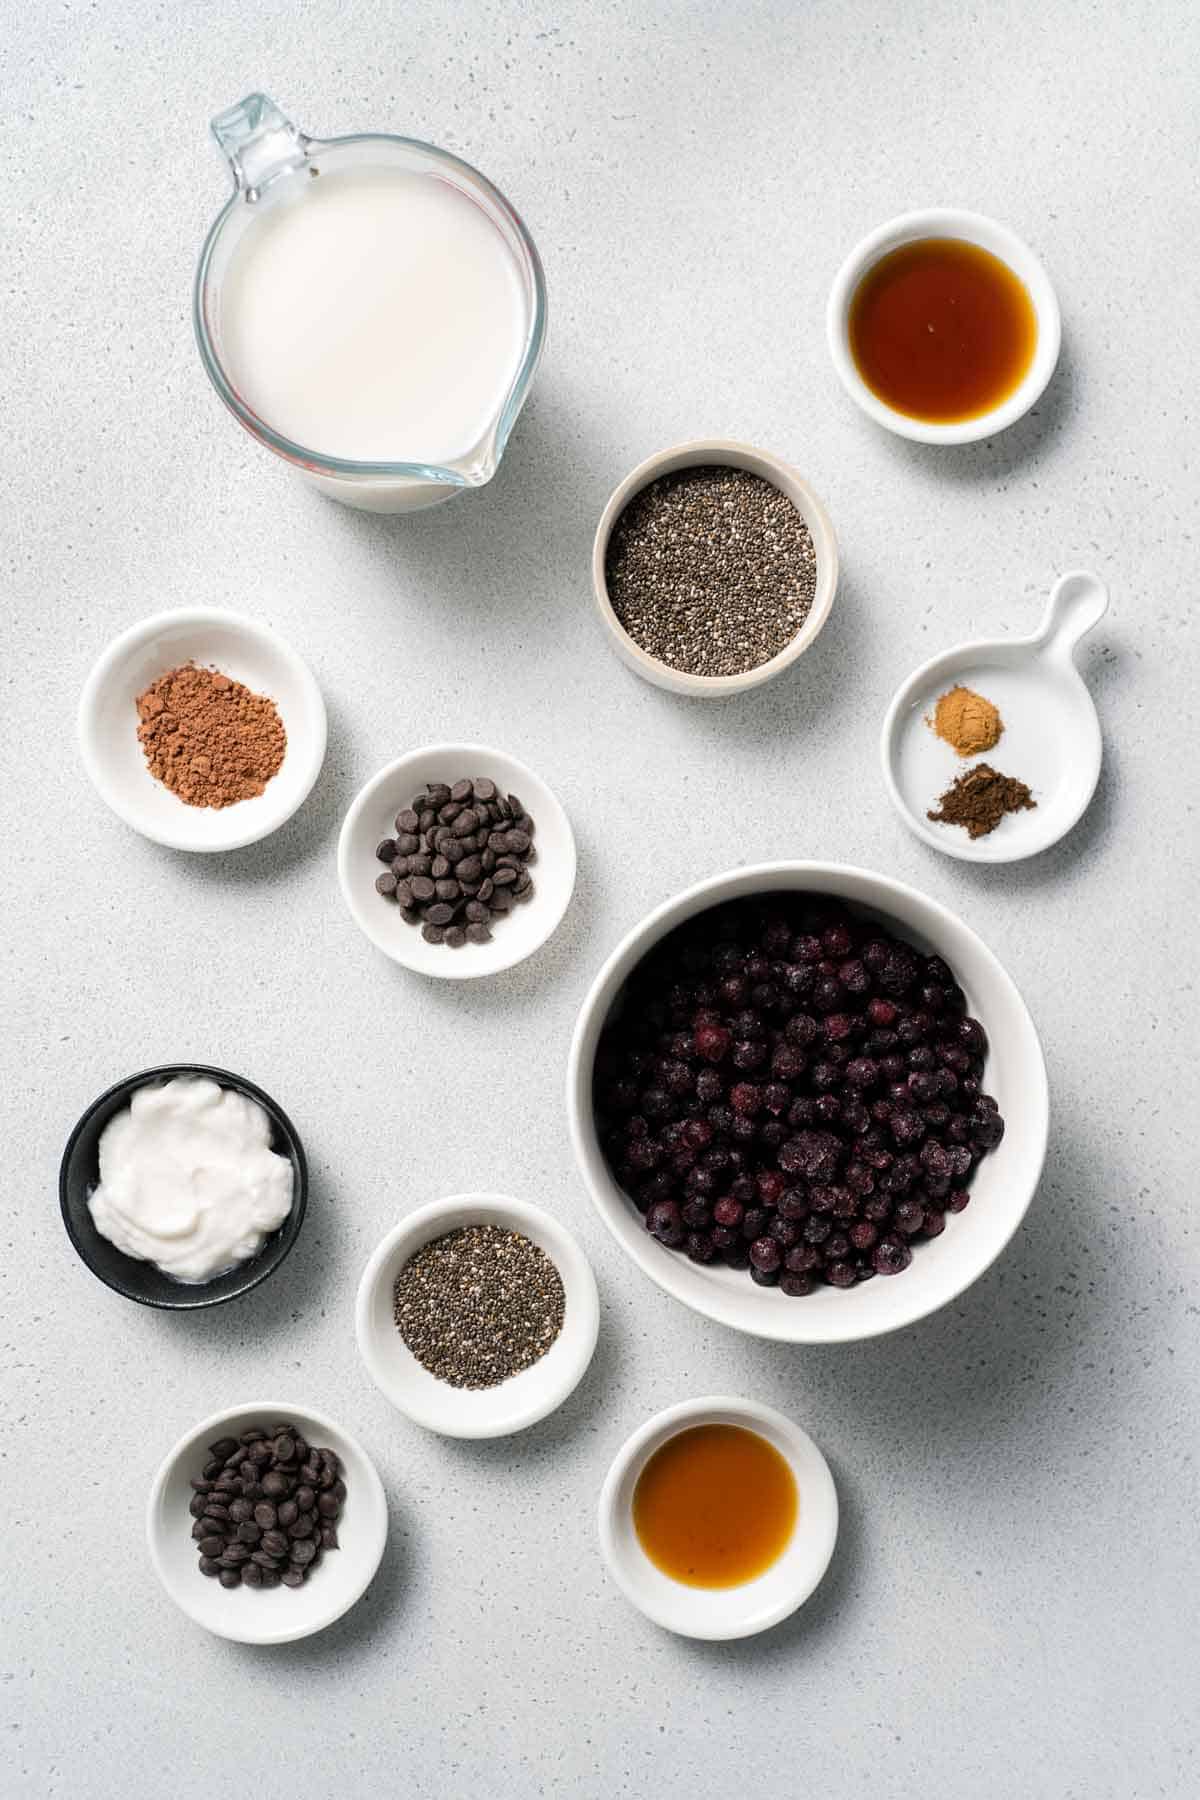 Ingredients needed to make chocolate blueberry chia pudding.